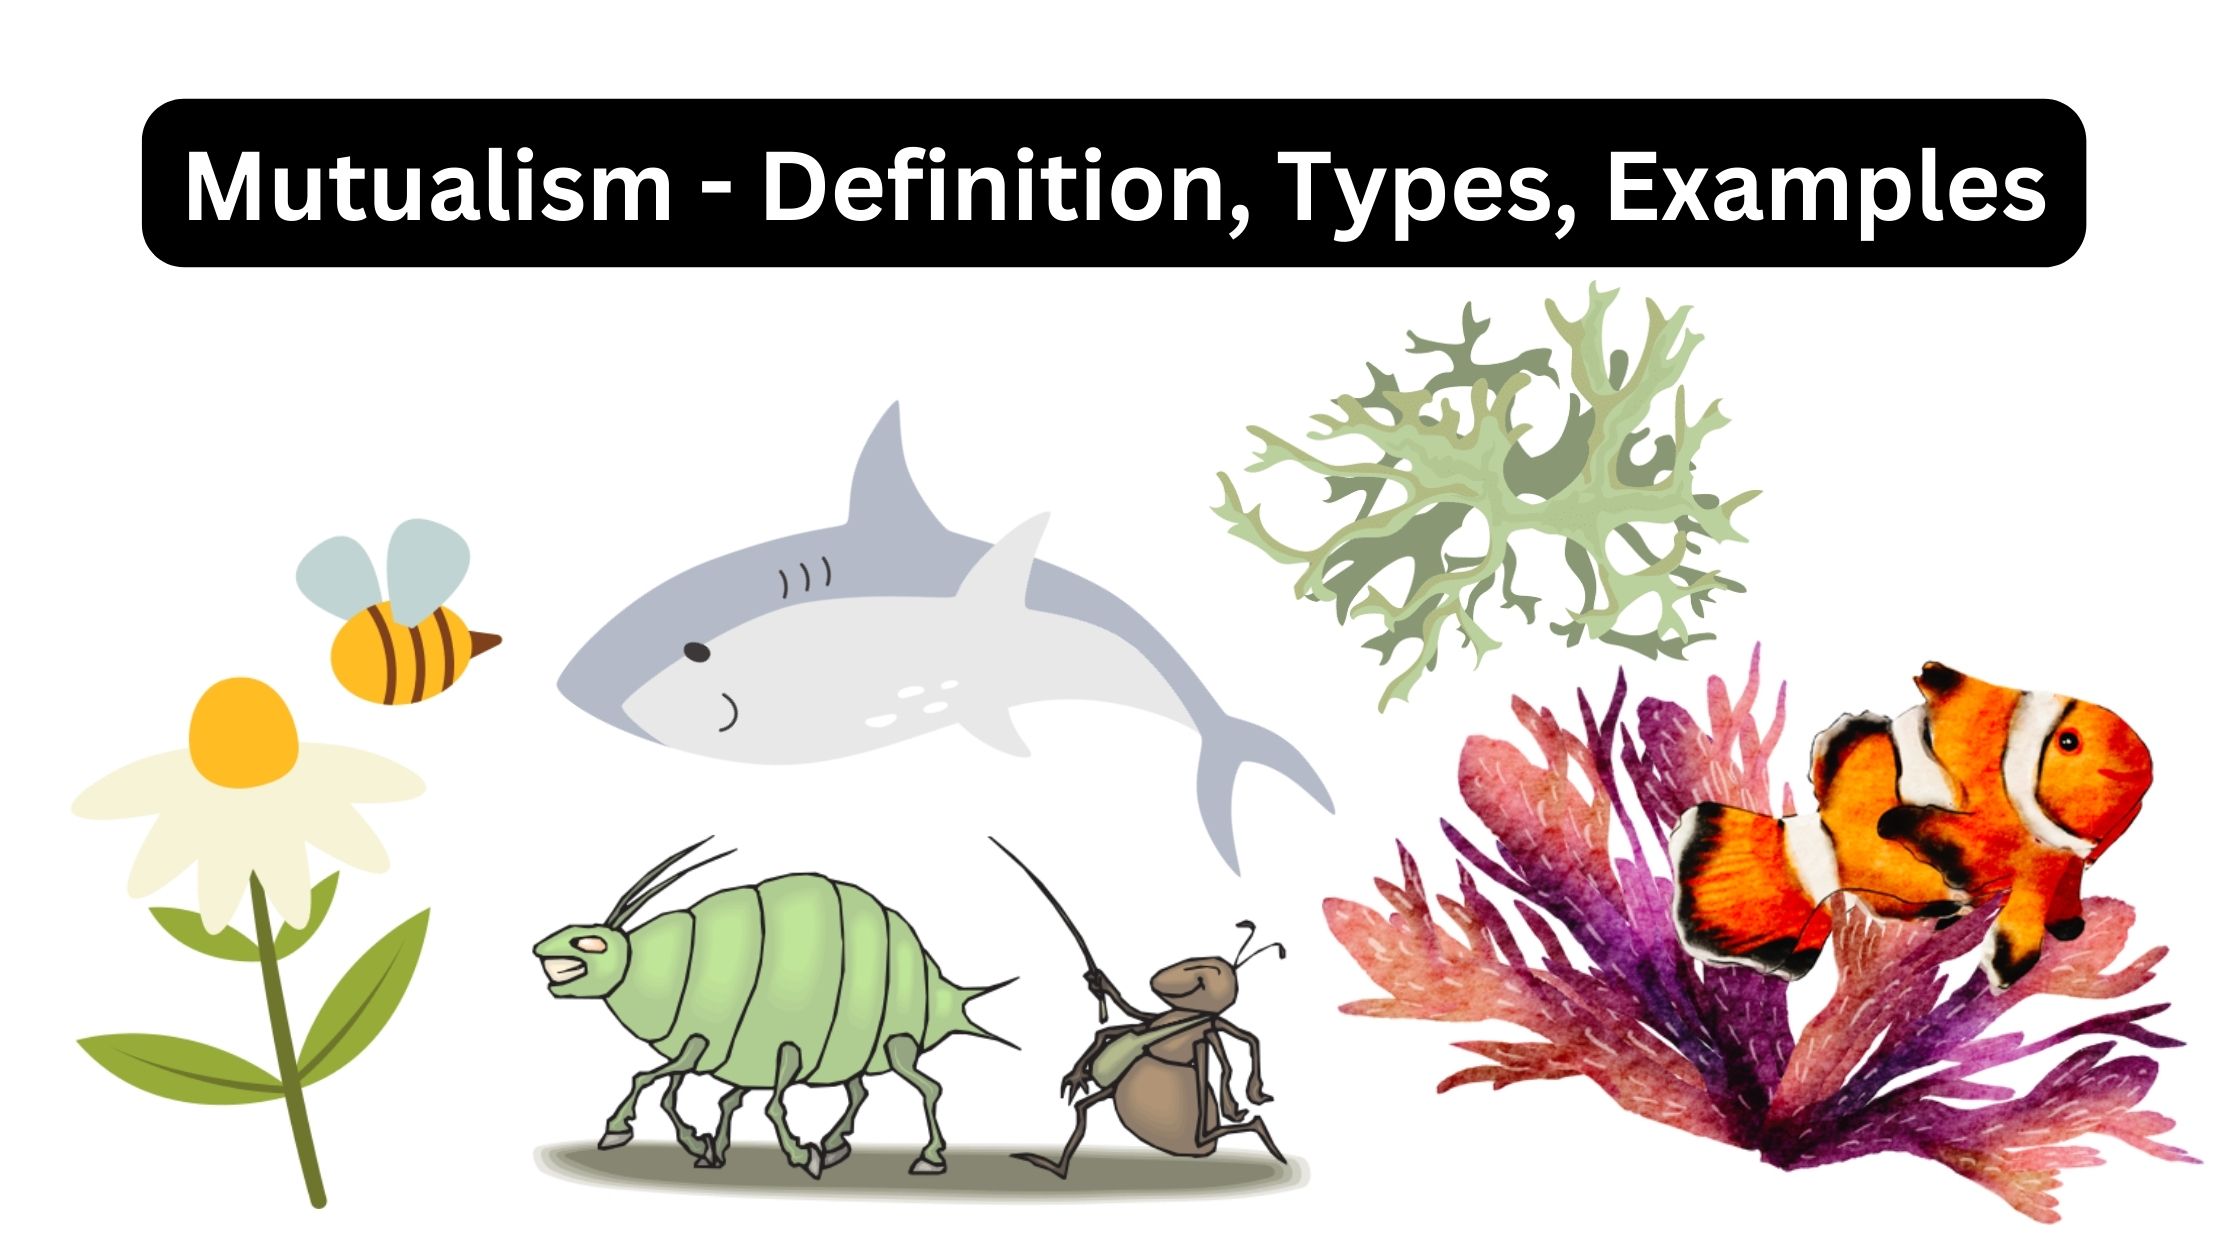 Mutualism - Definition, Types, Examples